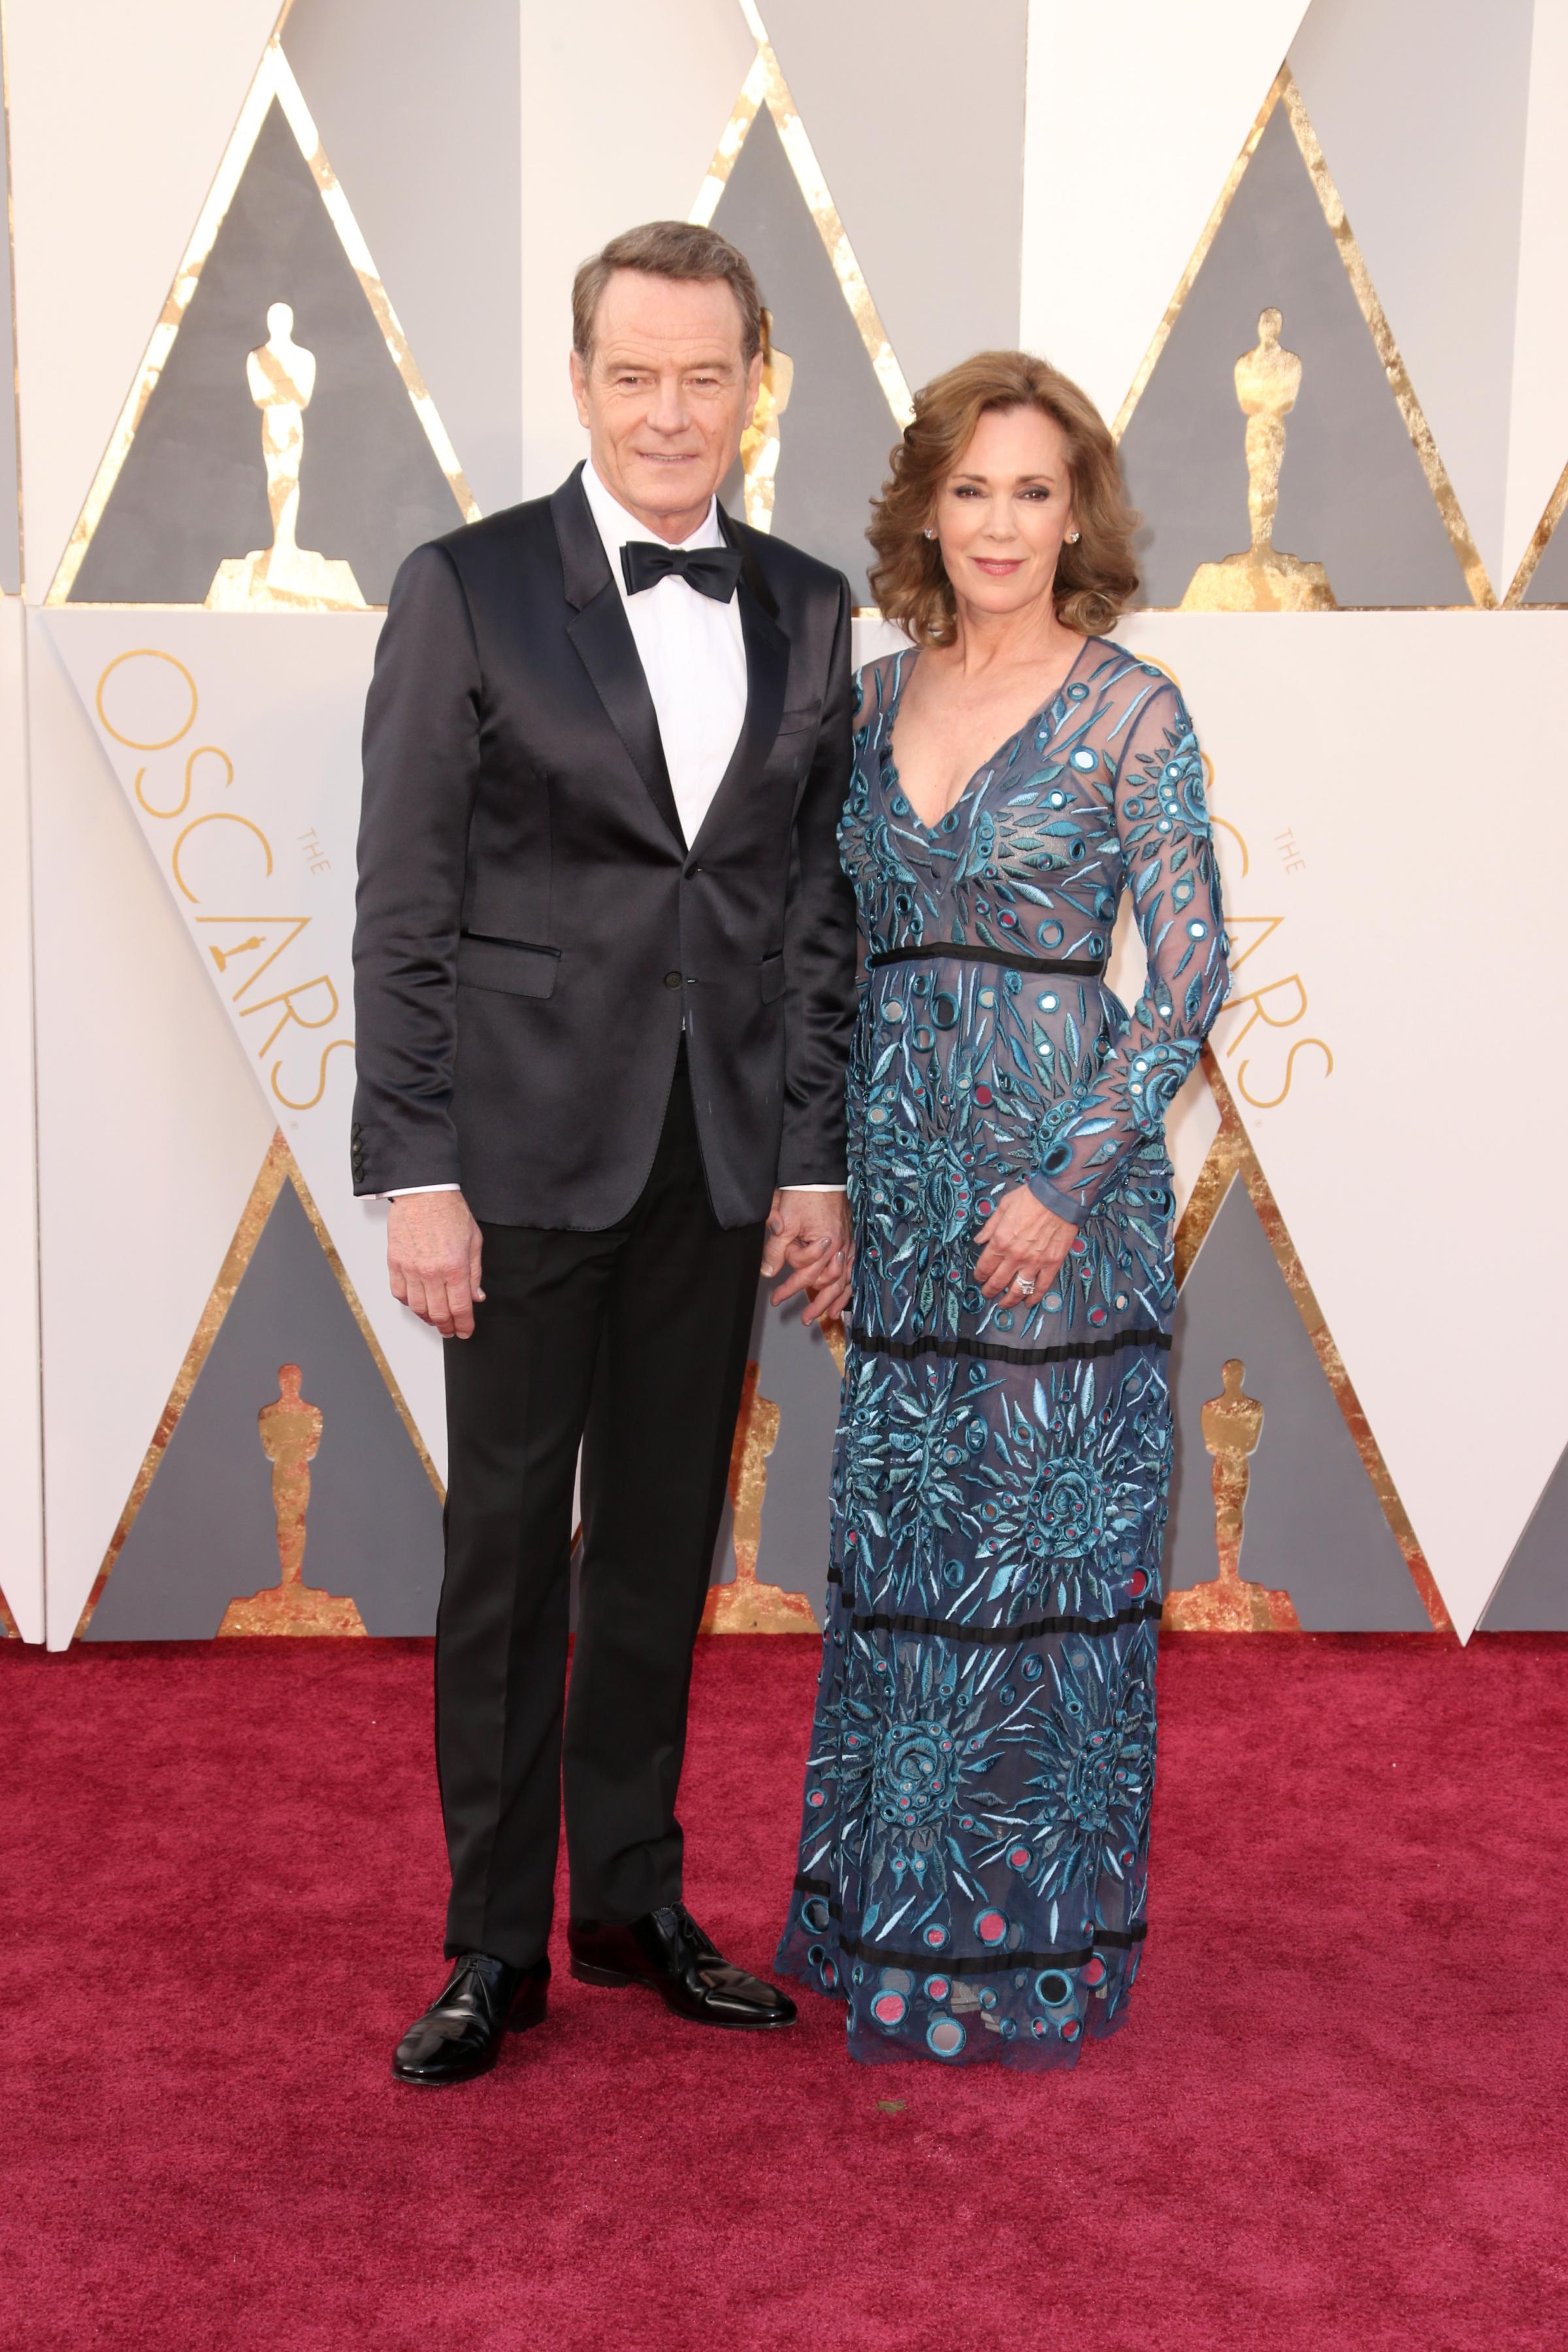 Bryan Cranston and Robin Dearden attend the 88th Annual Academy Awards on Feb. 28, 2016 in Hollywood, Calif.